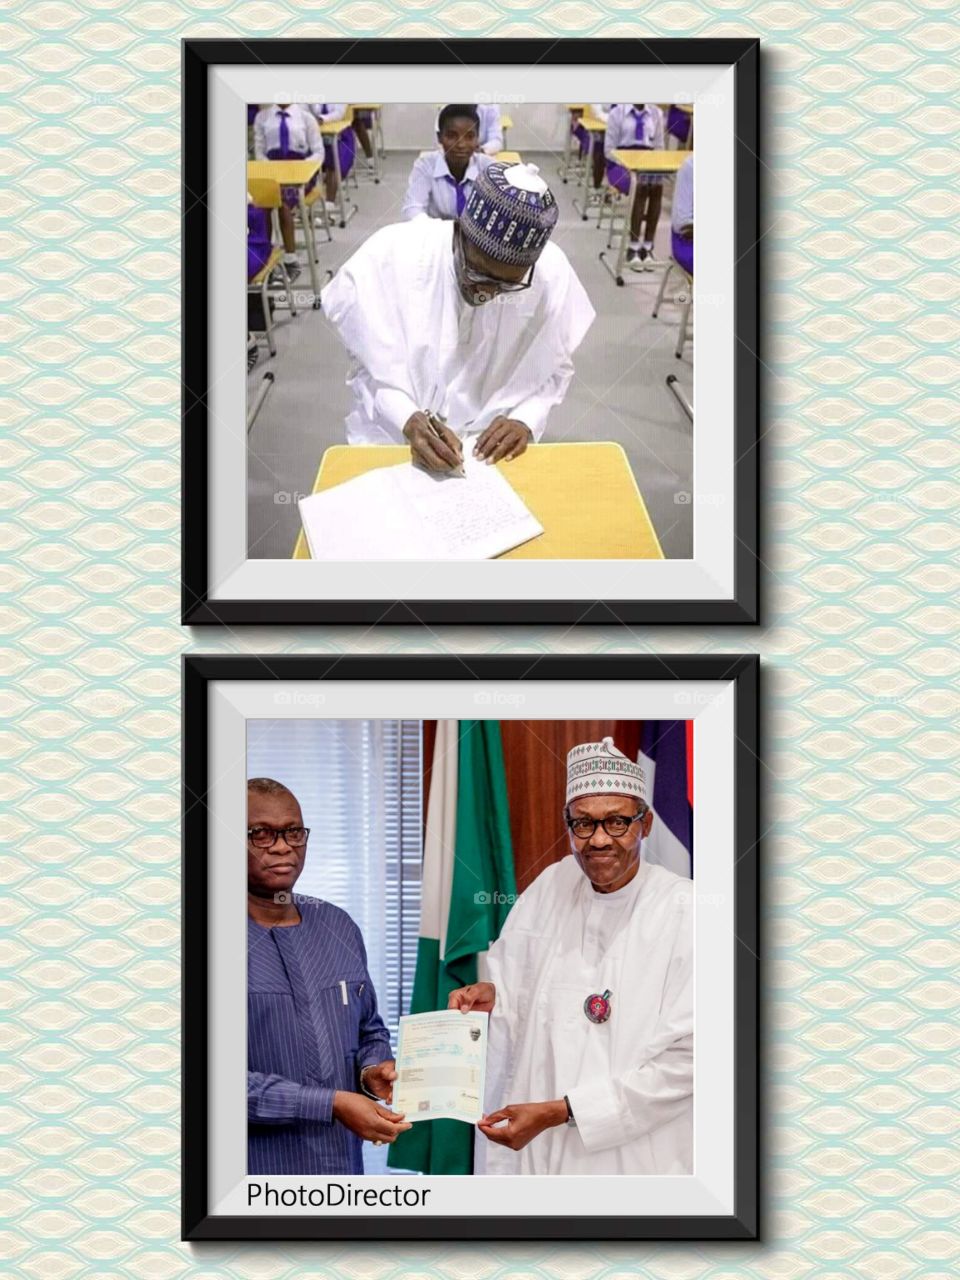 waw! president  buari of Nigerian just took hIs WASCE. to participate in 2019 election... what i s the future for Nigeria